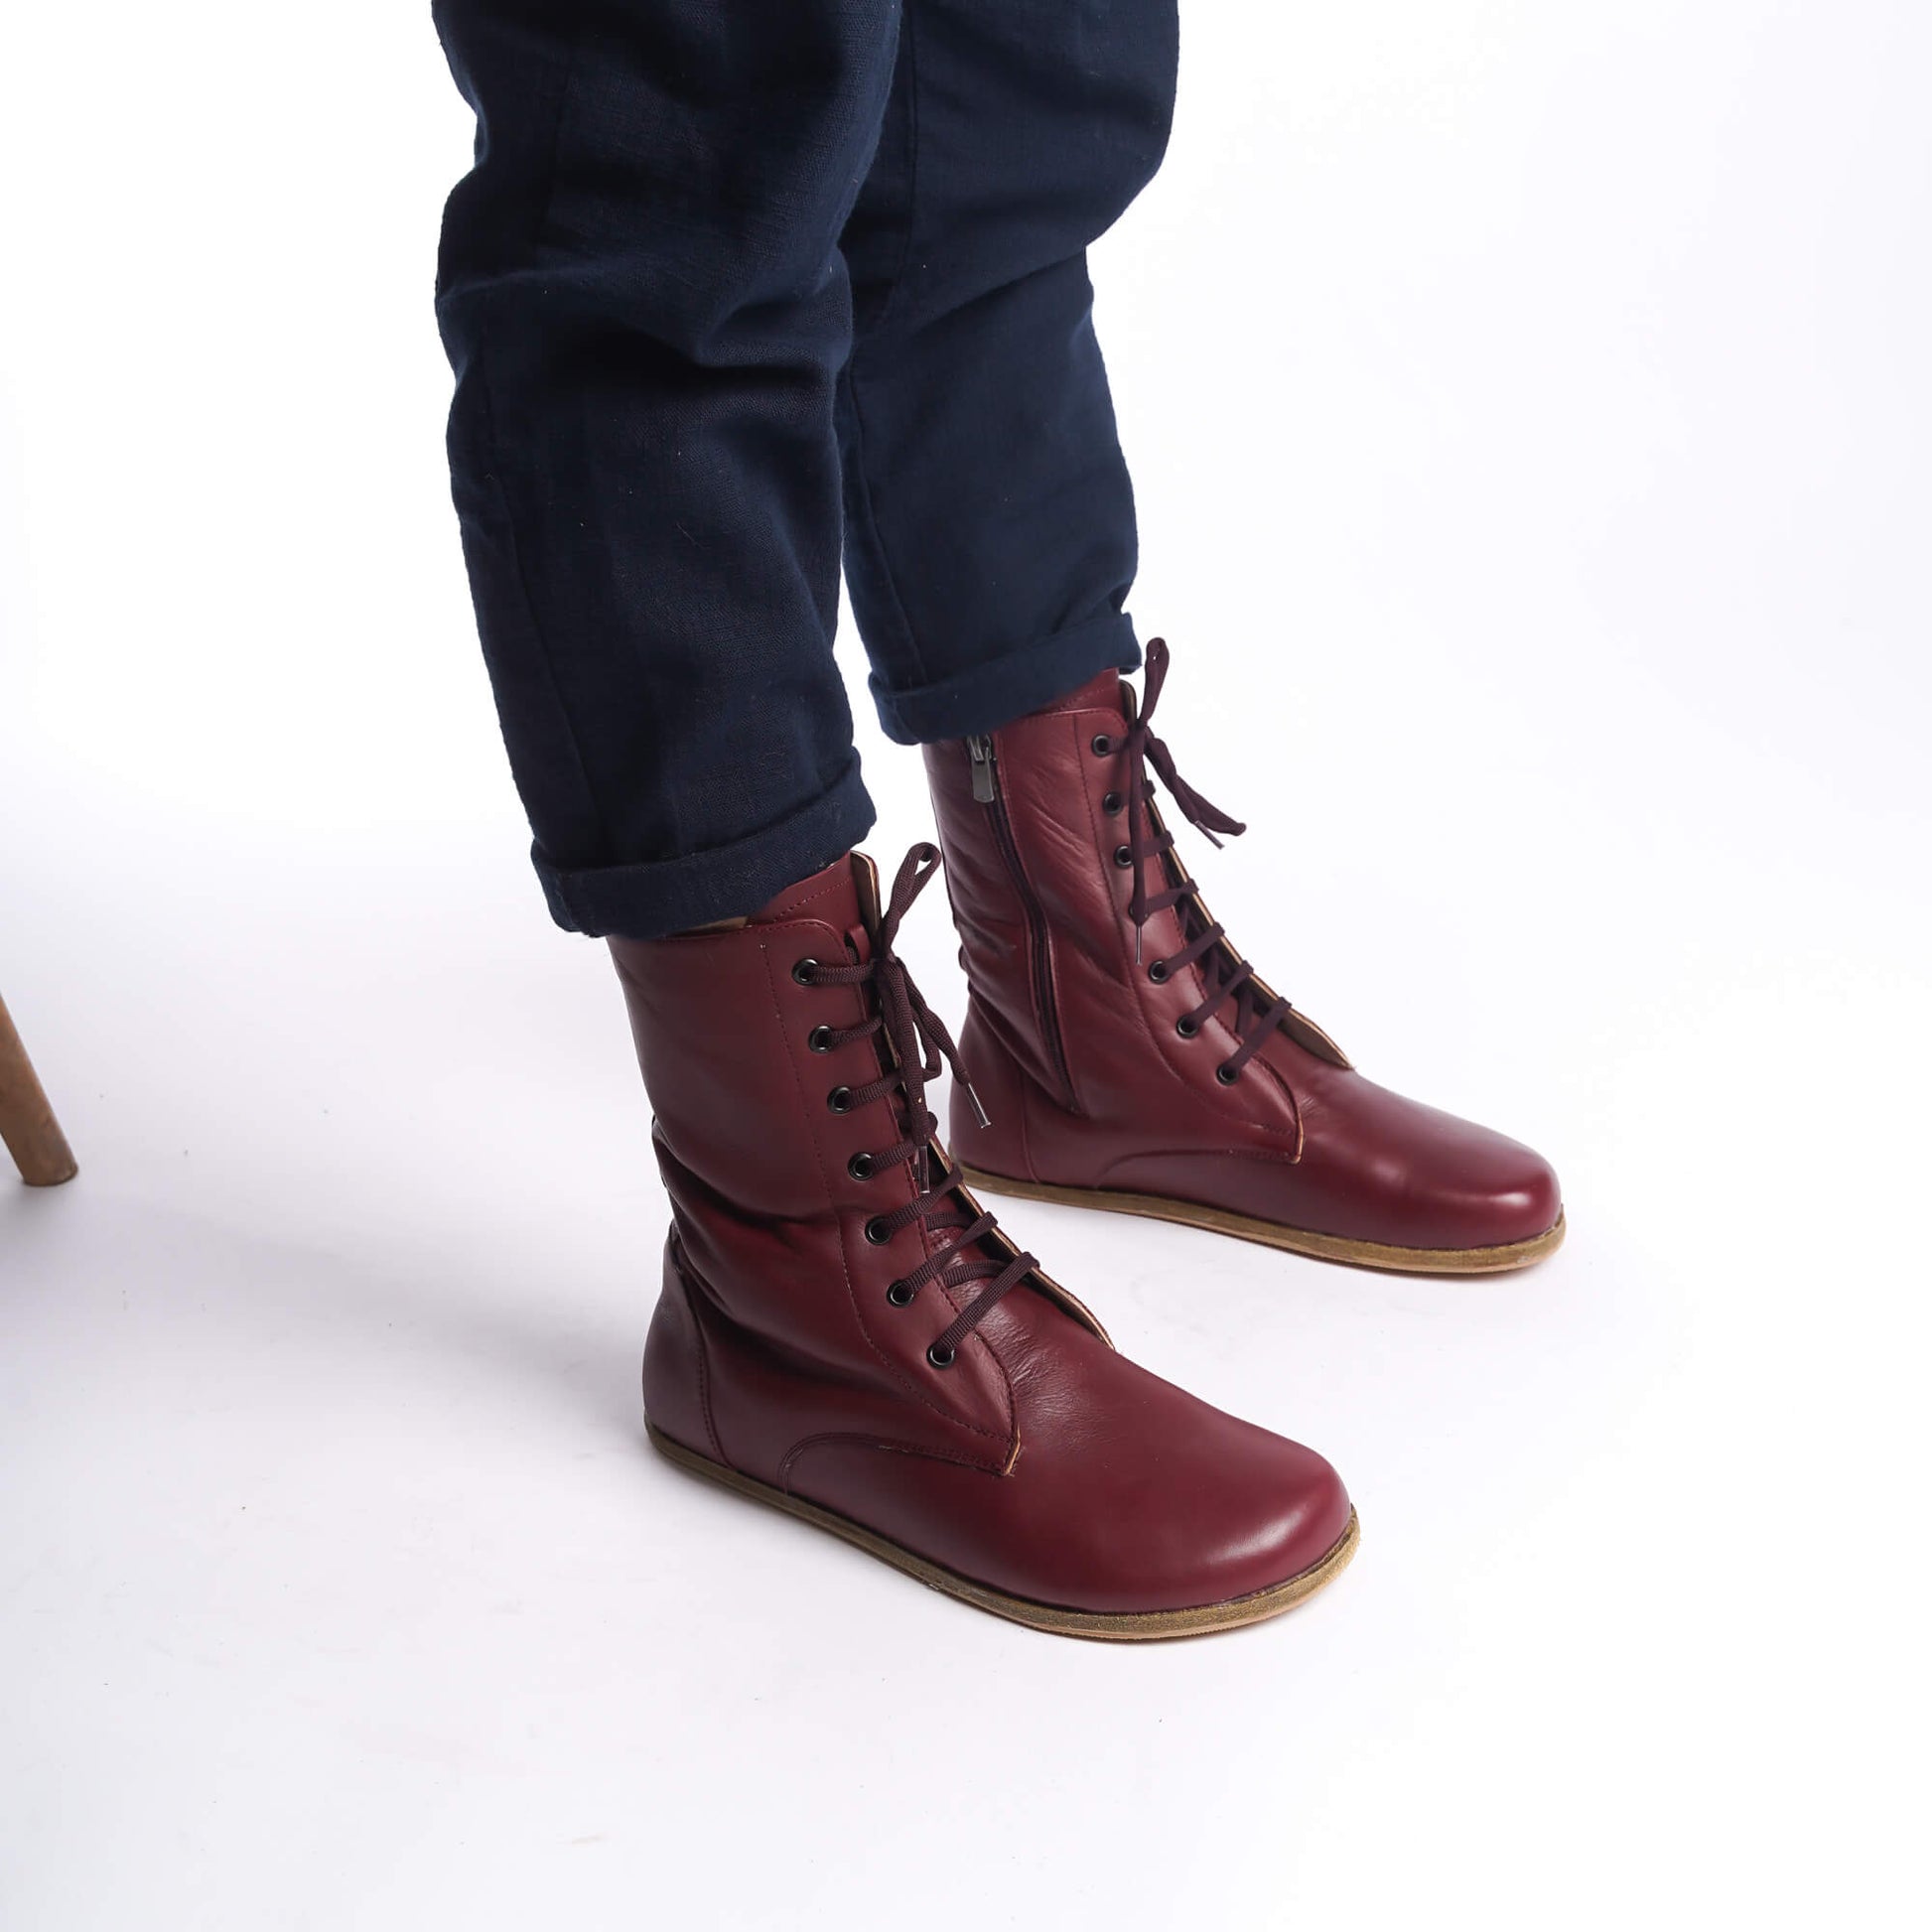 Side view of men's burgundy barefoot boots, highlighting the lace-up design and rich leather.